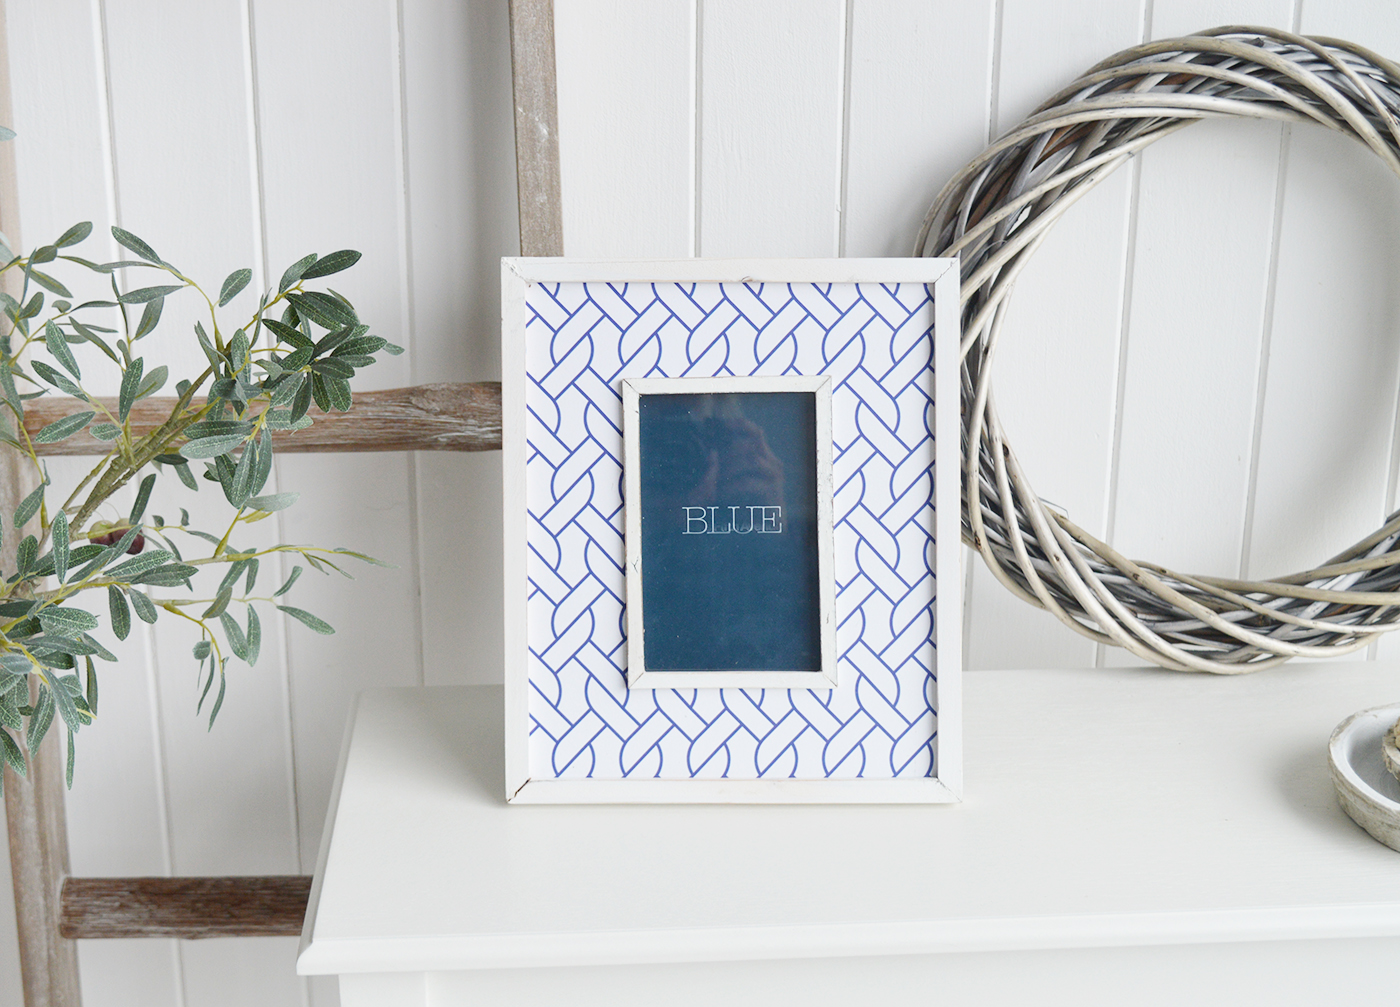 Clifton Photo Frames - New England Coastal, Farmhouse and Country Furniture and Interiors